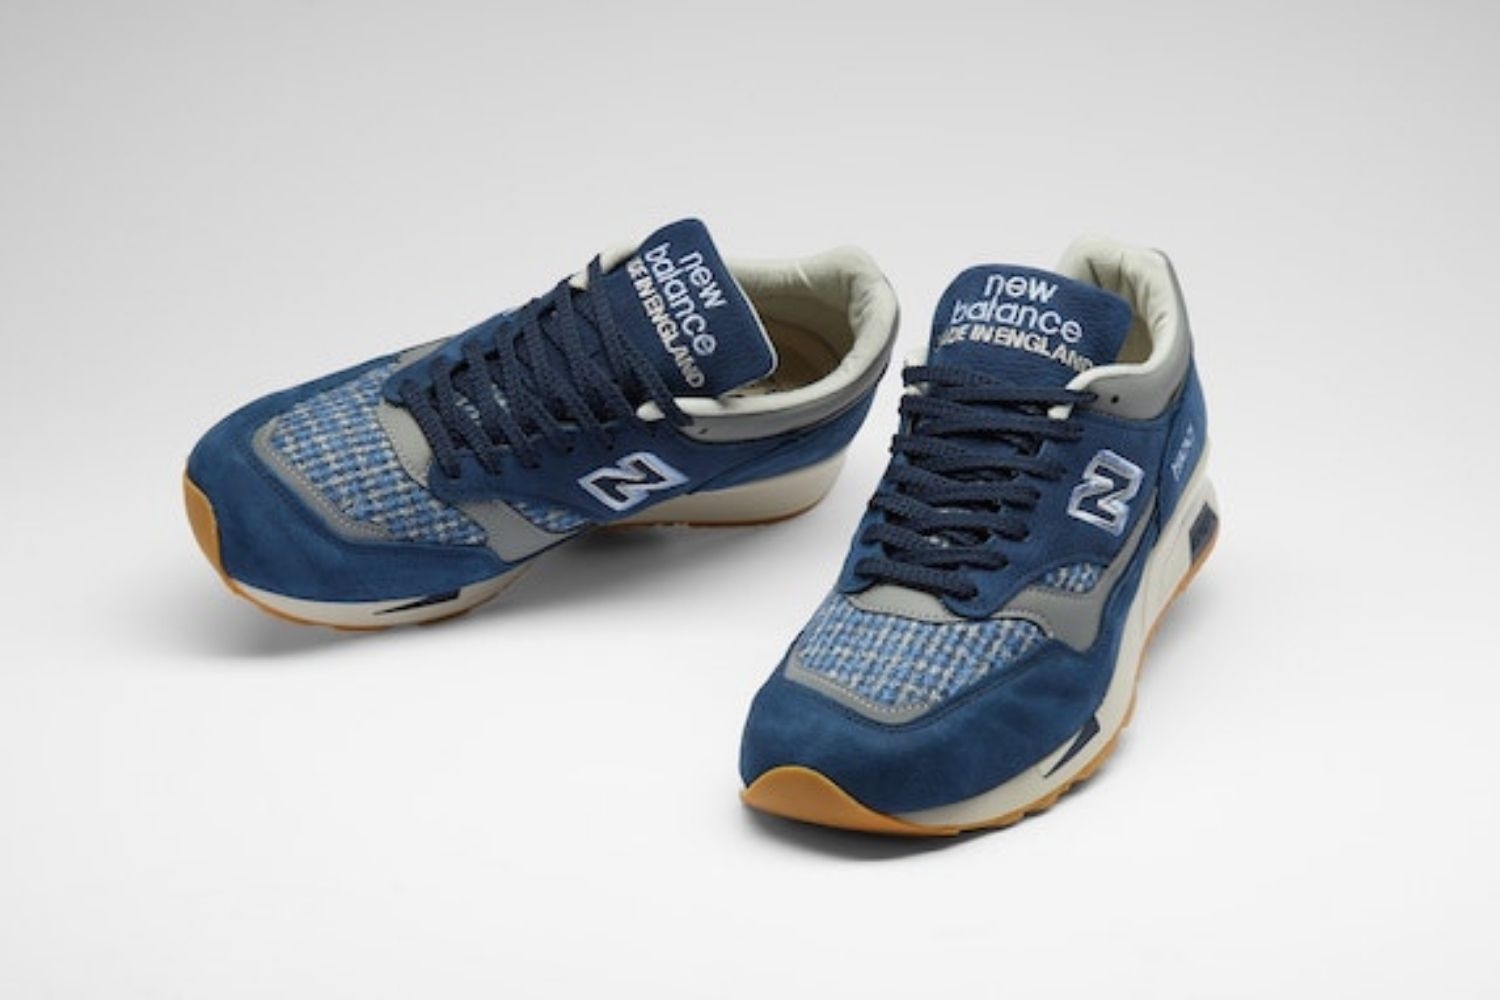 The New Balance x Harris Tweed Pack releases soon